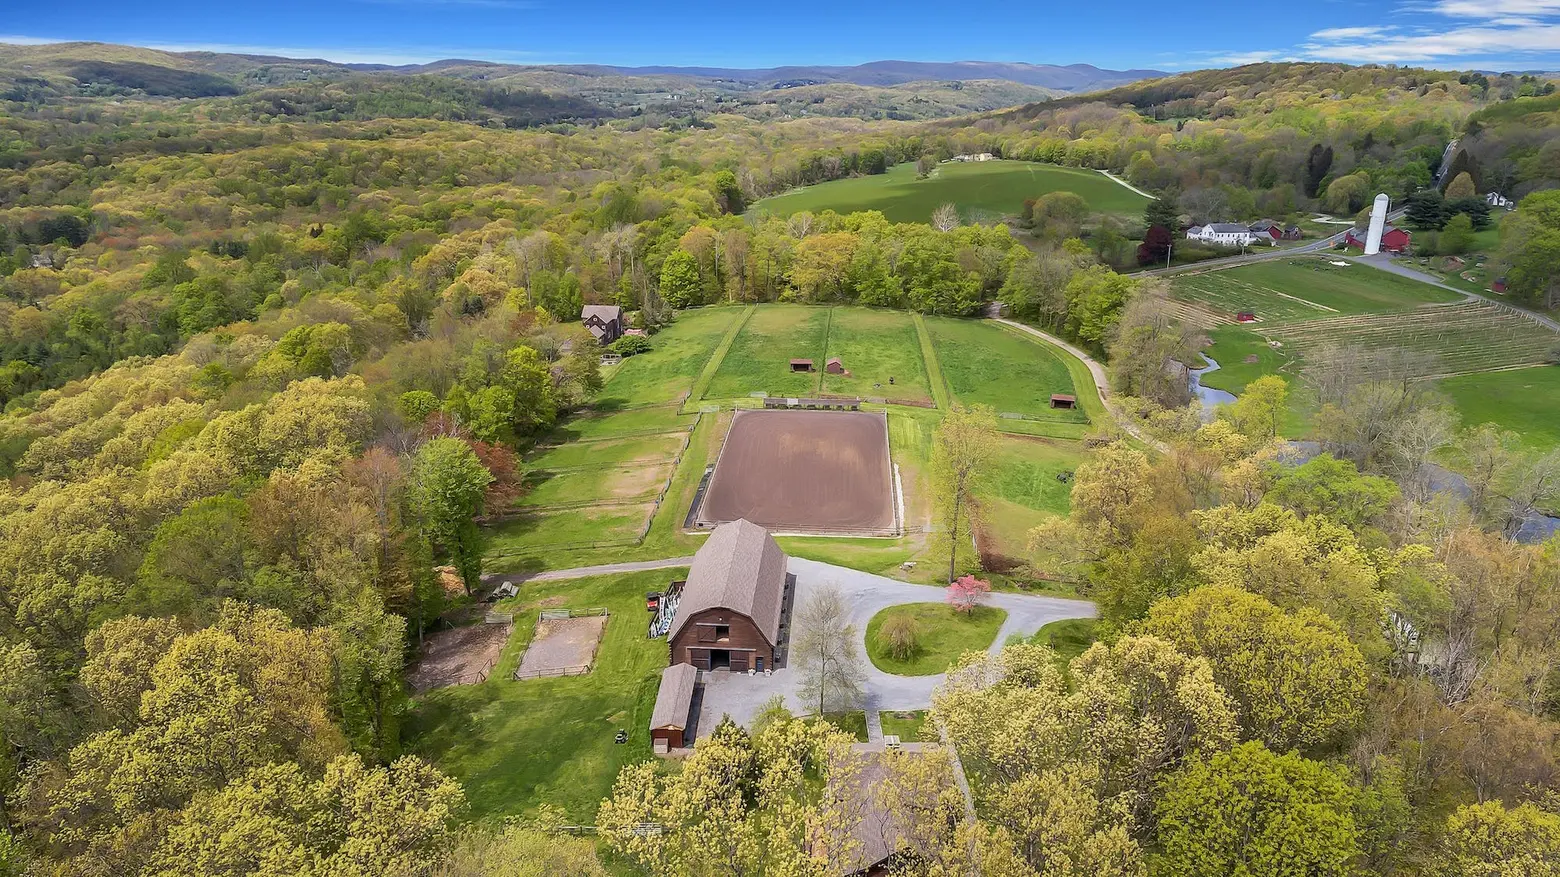 For the price of a Manhattan apartment, get a 10-acre horse ranch and cabin in Connecticut for $1.25M